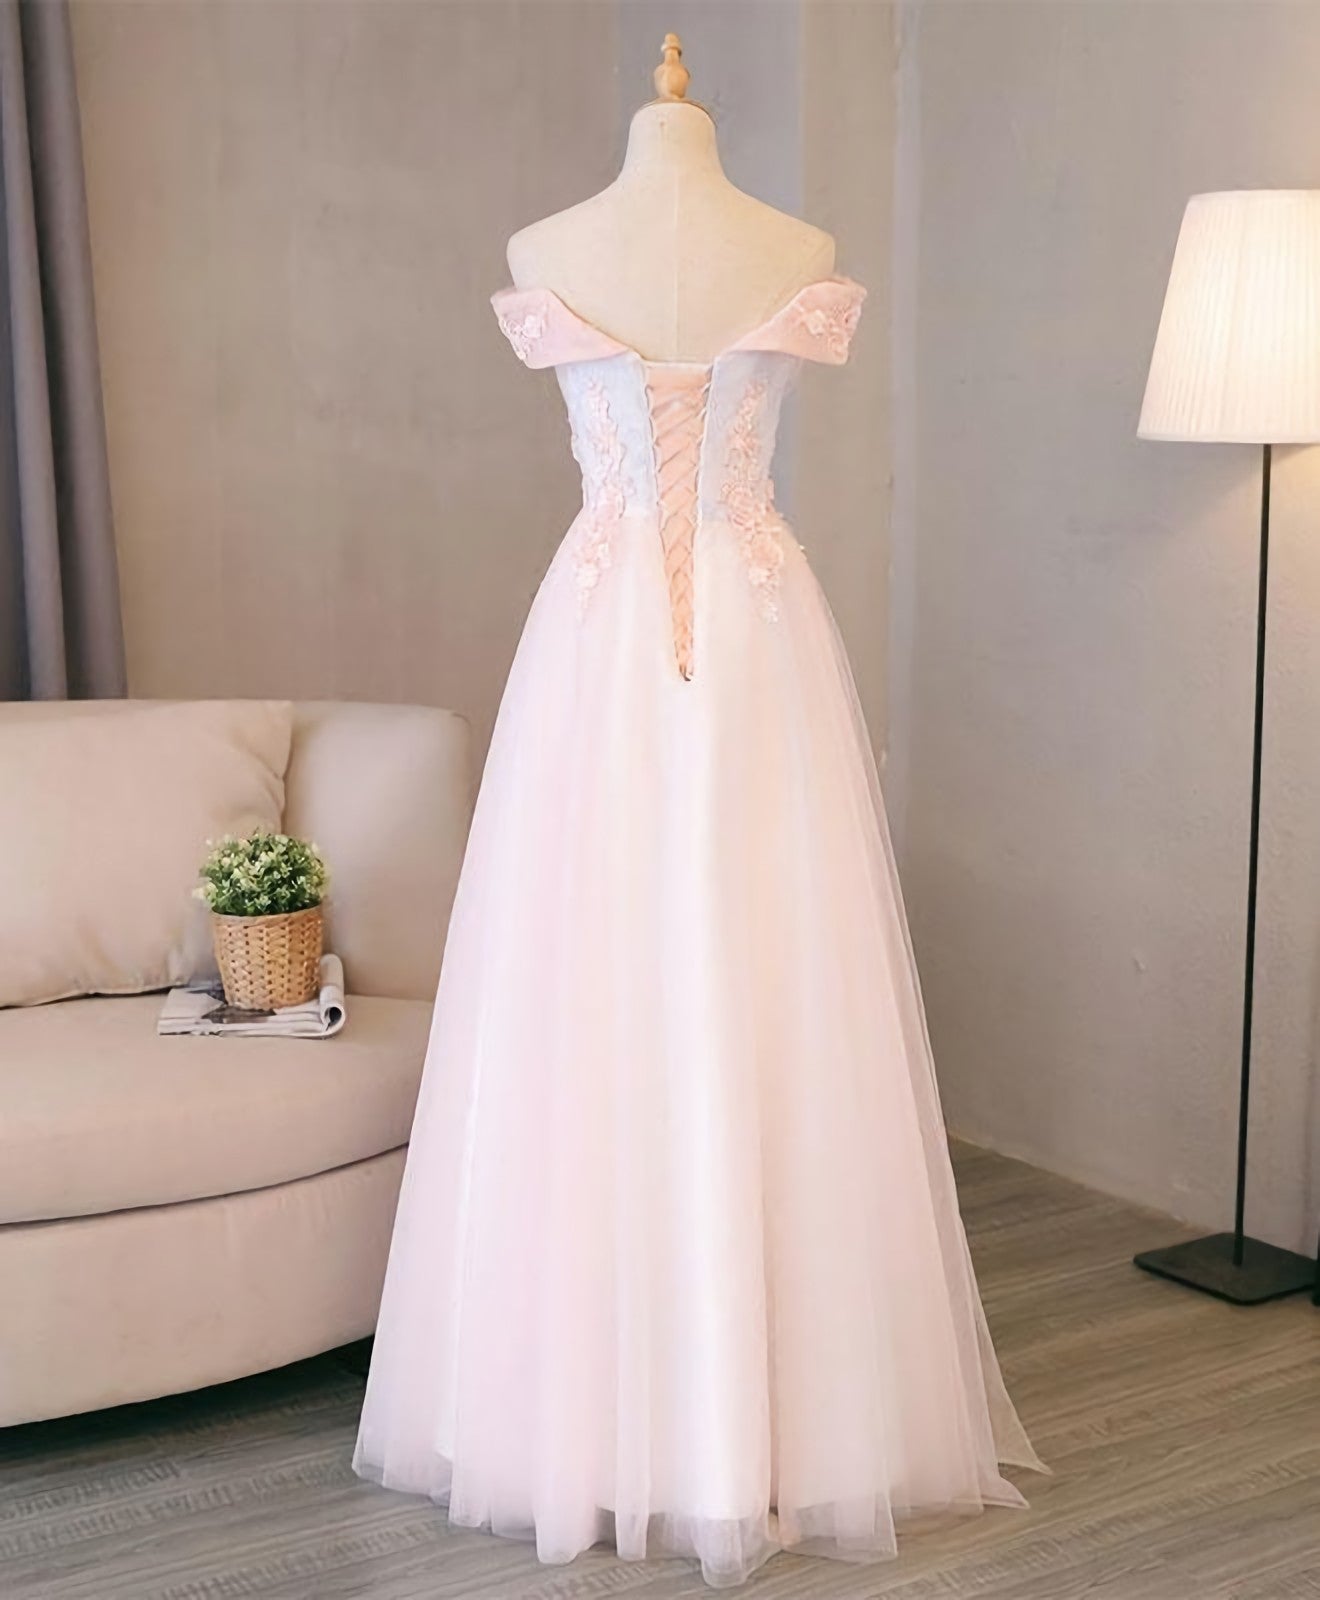 Bridesmaid Dresses With Sleeves, Light Pink Lace Off Shoulder Lonng Prom Dress, Pink Evening Dress